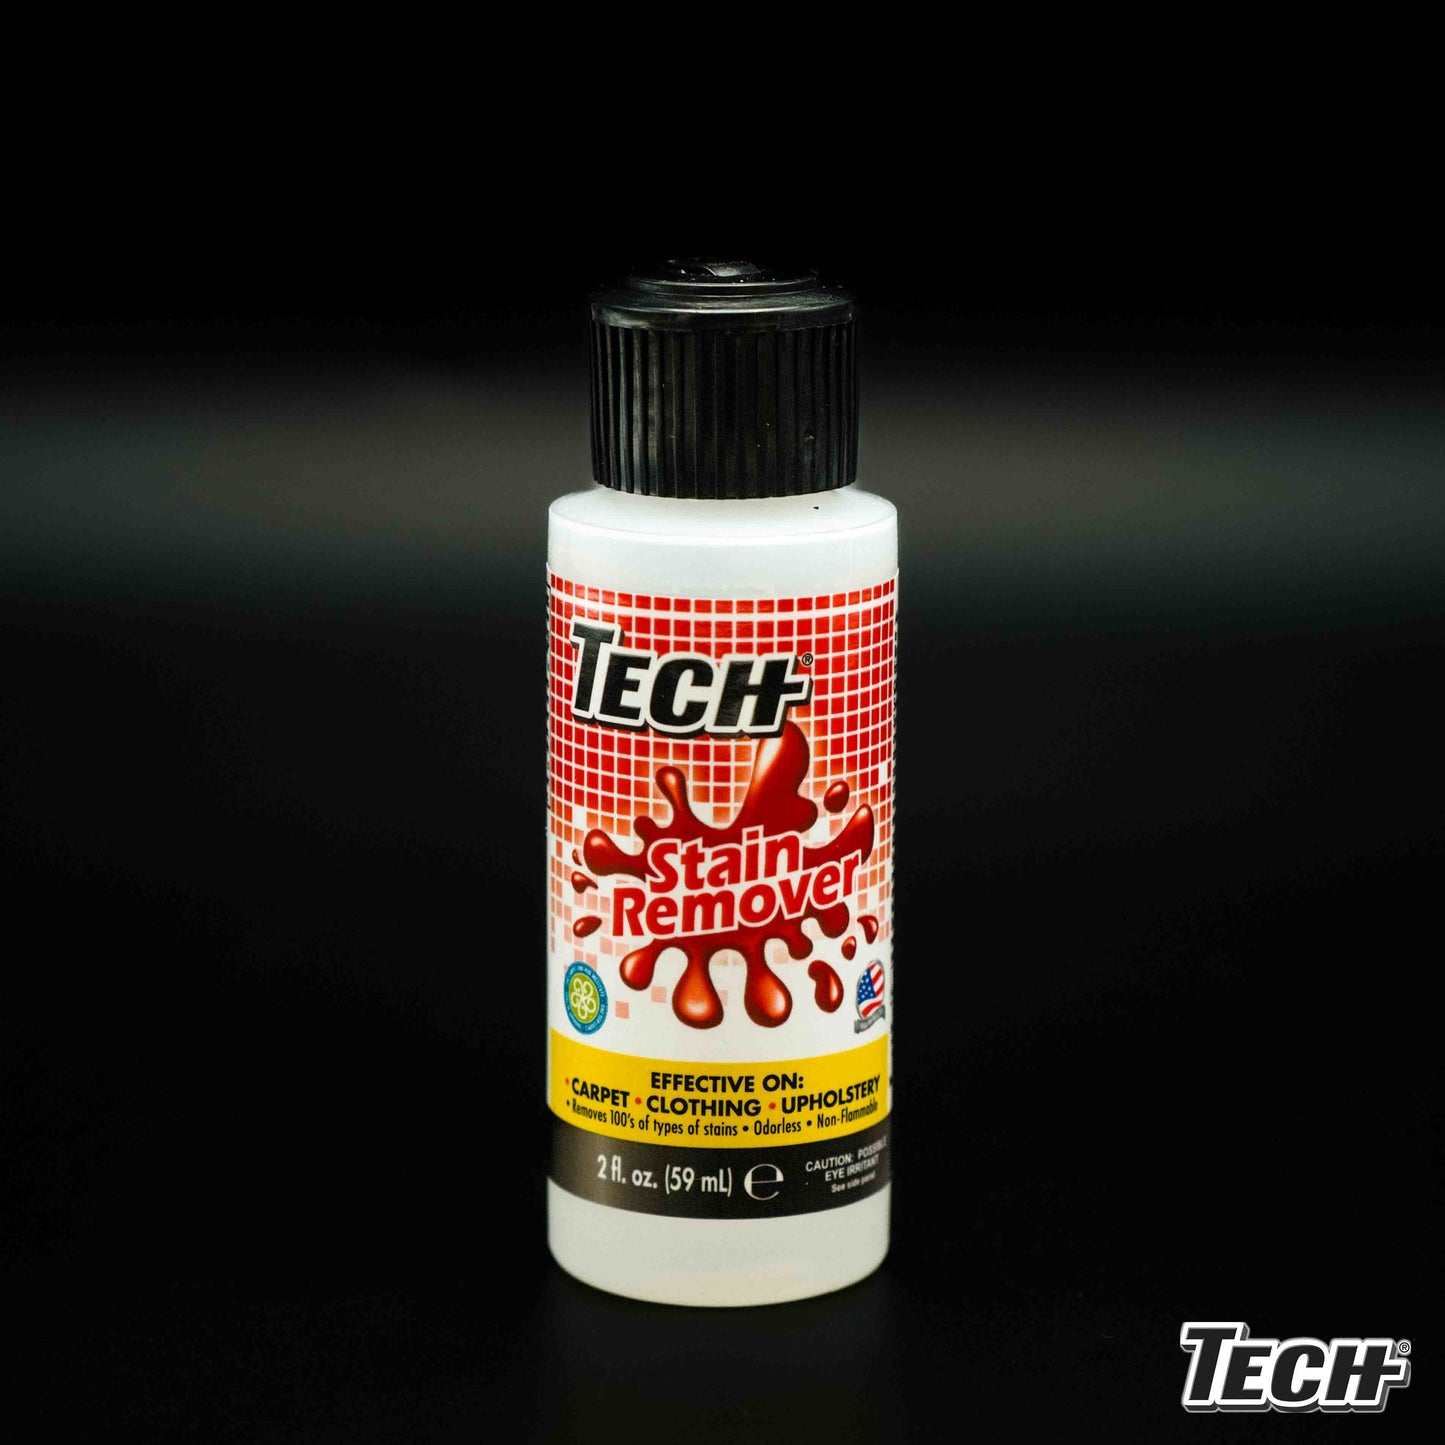 TECH Stain Remover 2 - 2 oz Bottles - Effective Stain Remover for Carpet, Clothing, Laundry, Upholstery and Other Washable Fabrics